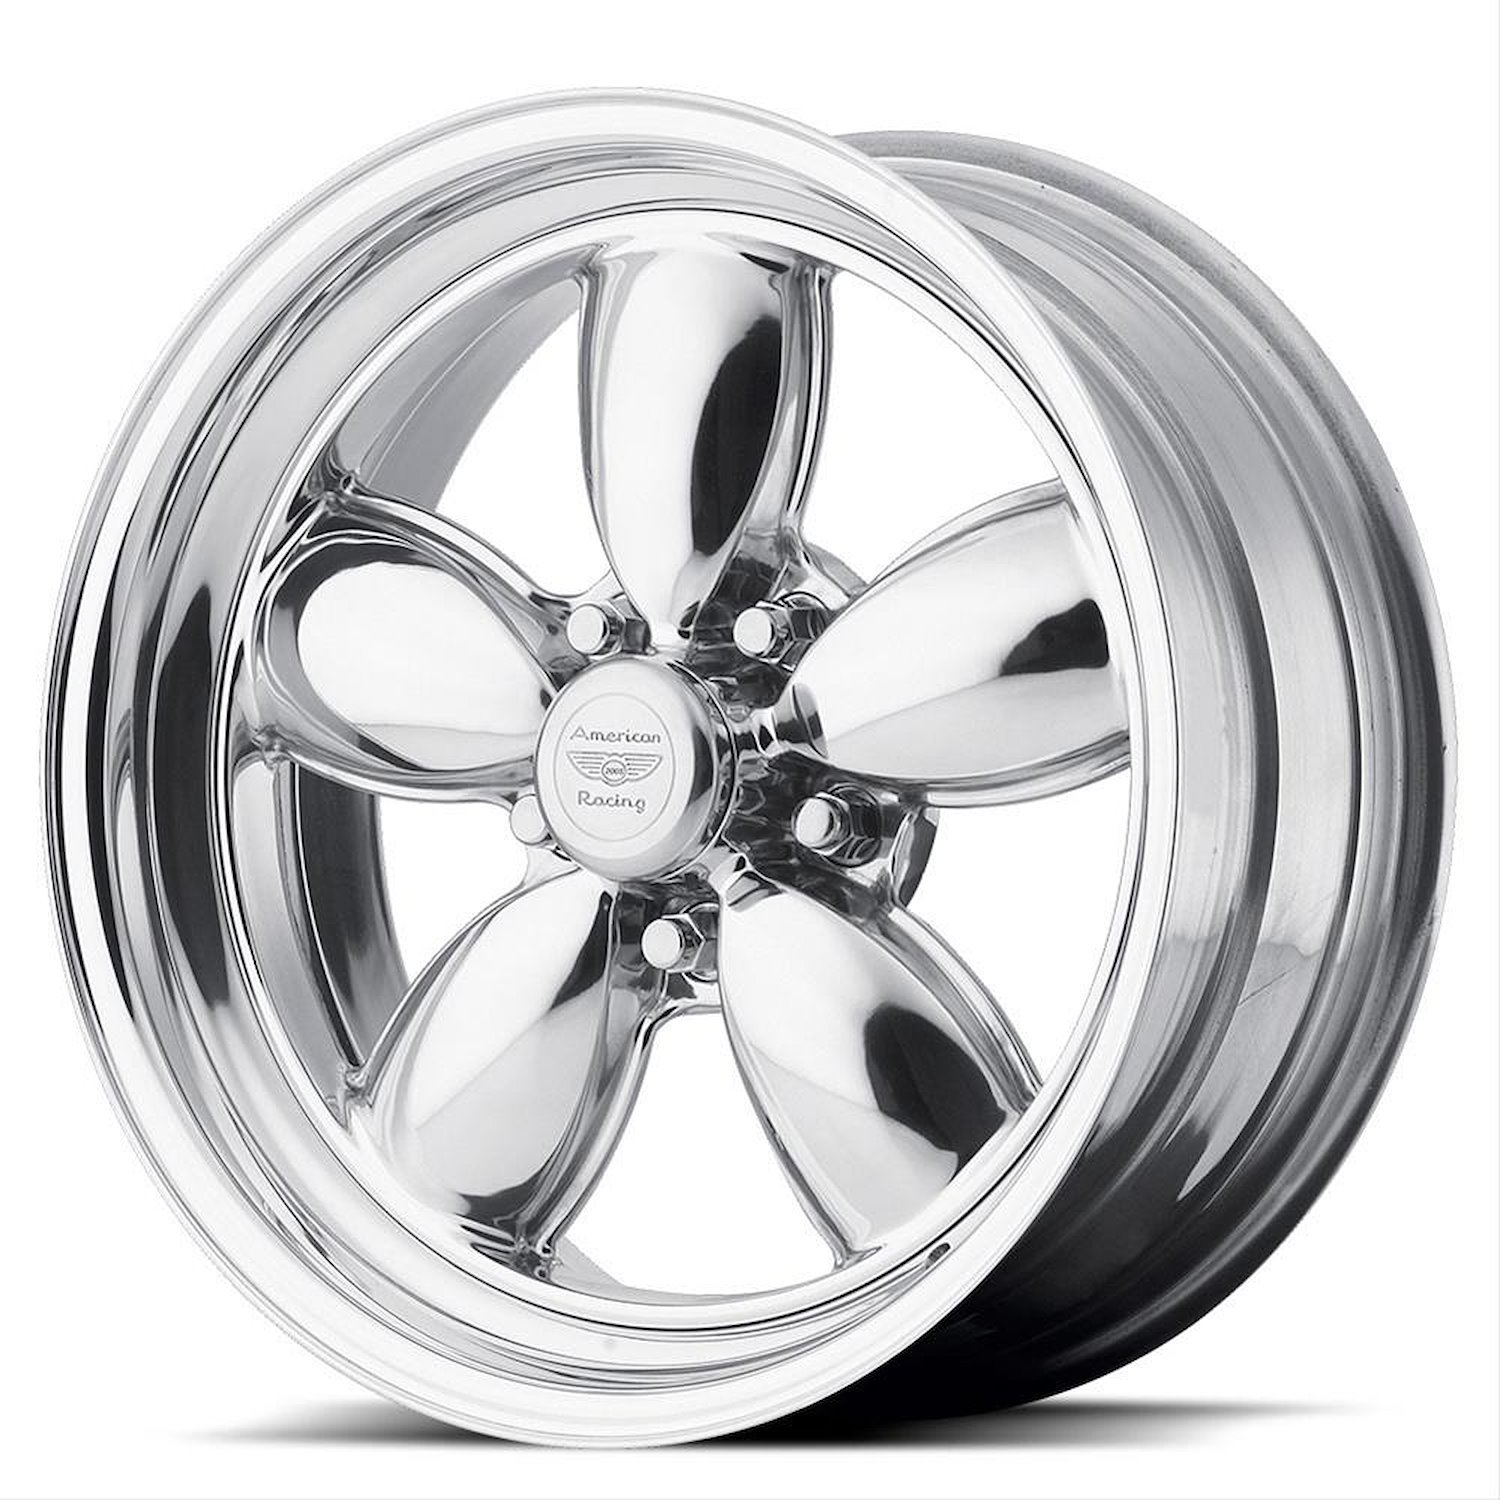 VN420 Classic 200S Wheel Size: 15" X 10" Bolt Pattern: 5X114.3 mm [Polished]